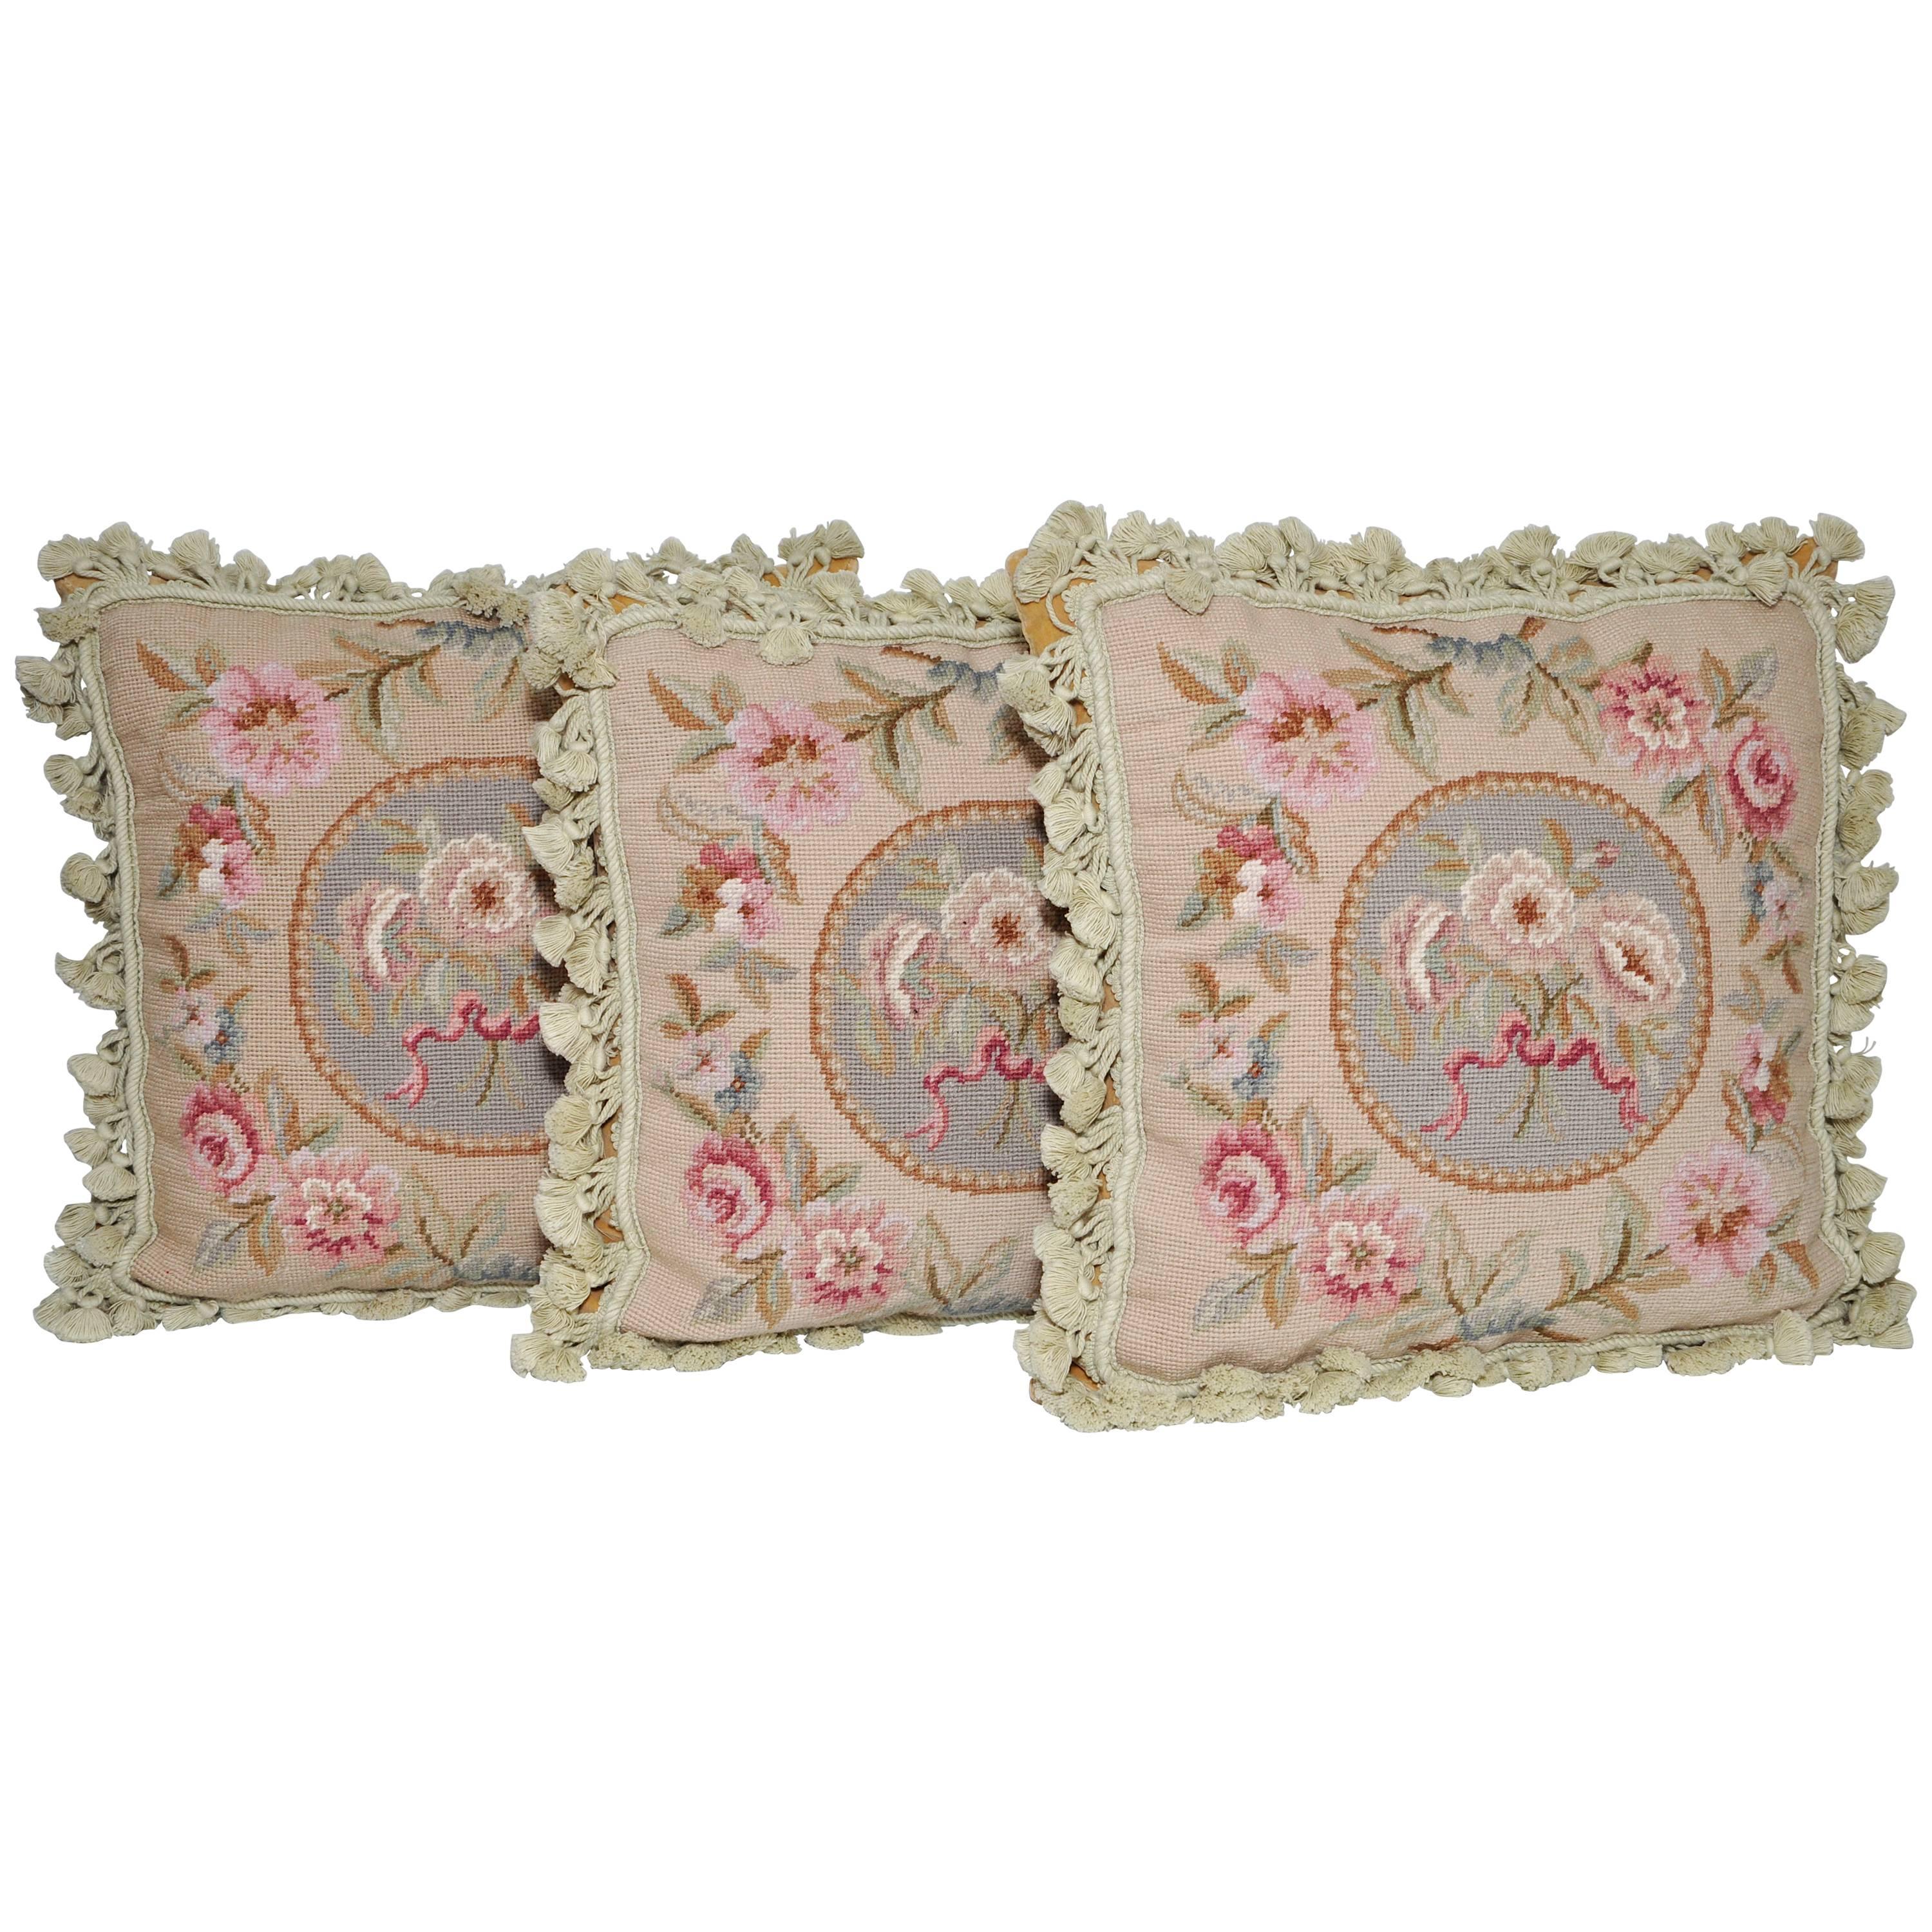 Beautiful vintage French Provincial cushions (pillows) with antique Aubusson style roses and decorative floral bouquets. Luscious, opulent, rich, luxury and divine. An exquisite accent for your interior whether traditional, Rococo, country, classic